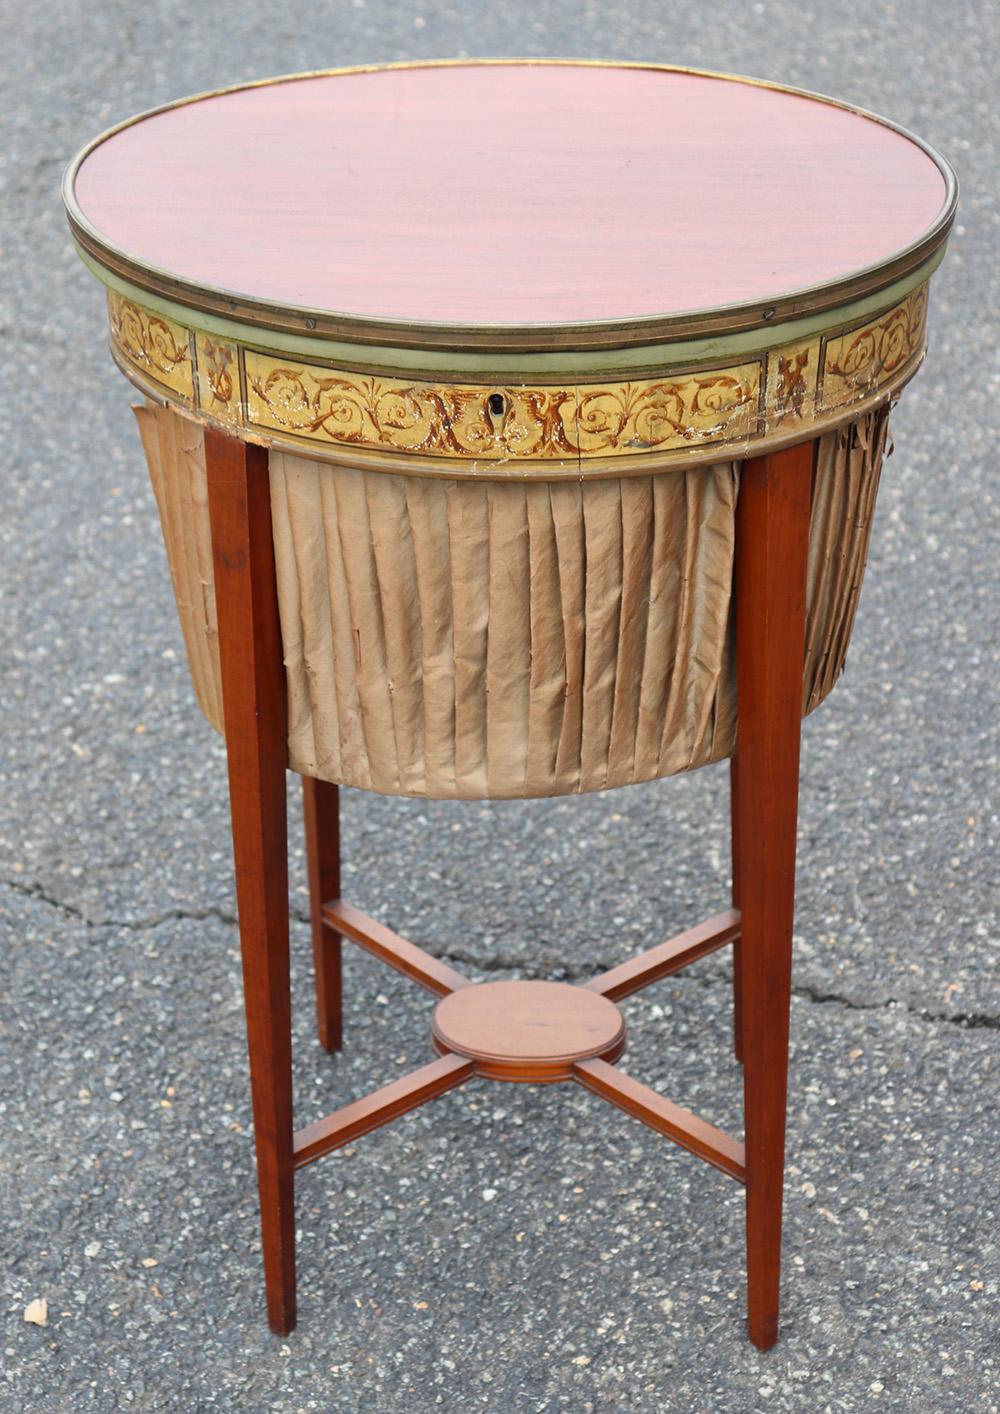 Early 20th Century English Regency Mahogany and Satinwood Sewing Stand with Silk Basket C1890